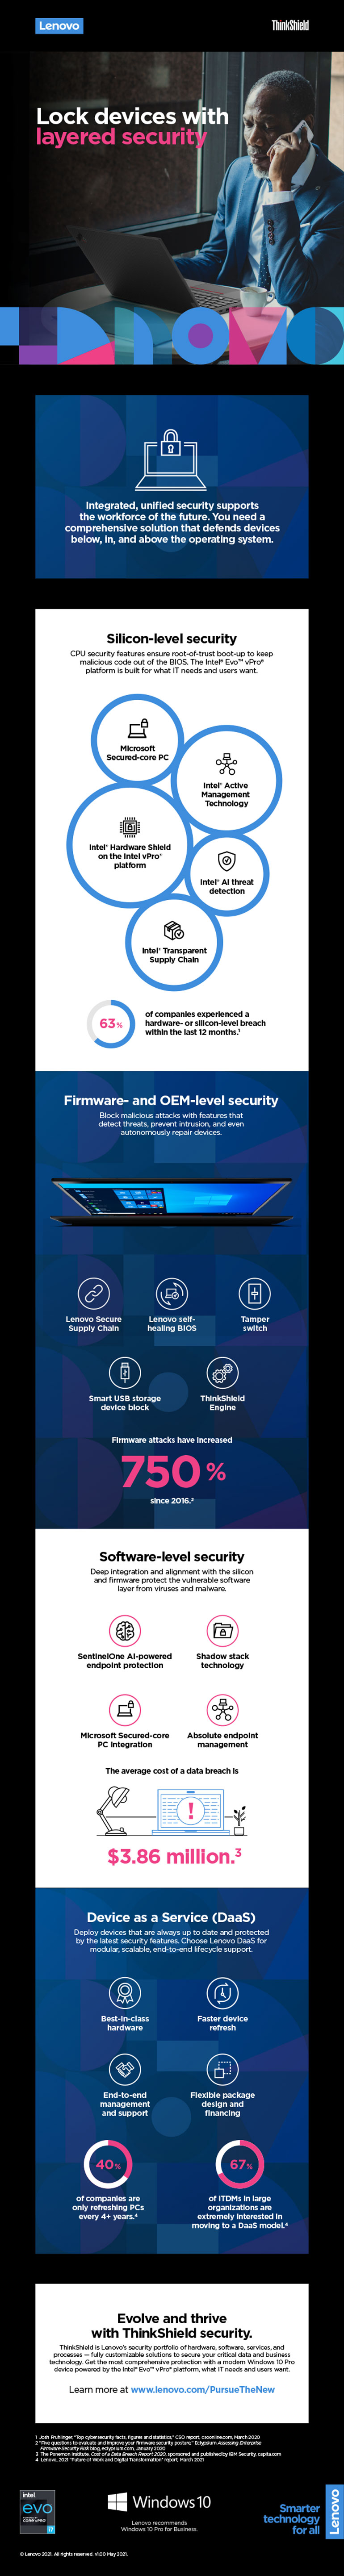 Lock Devices With Layered Security infographic as translated below.